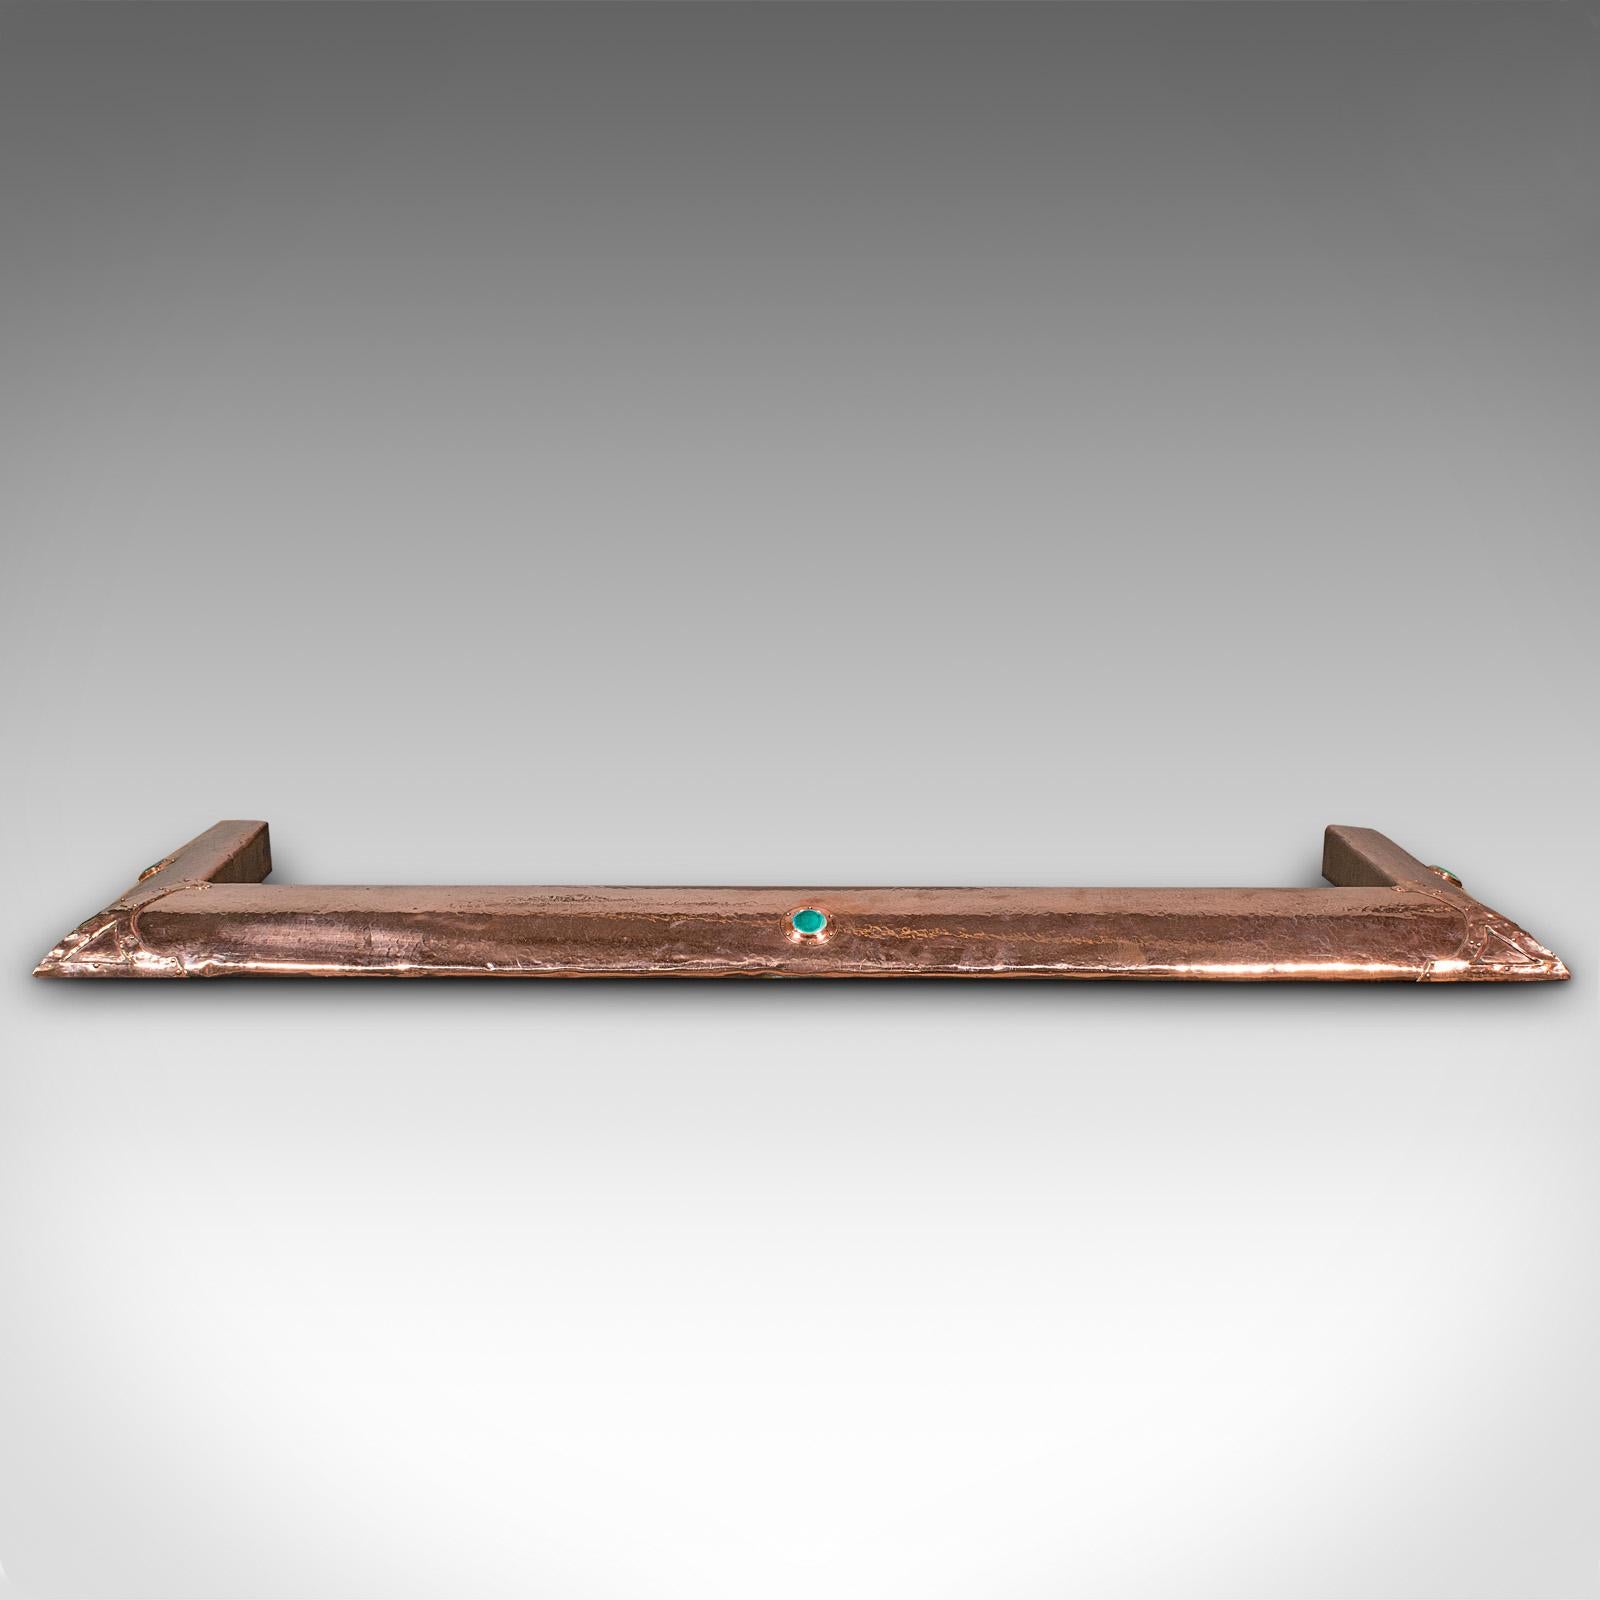 This is an antique Arts and Crafts fire kerb. An English, copper fireside surround with Ruskin-esque cabochon, dating to the late Victorian period, circa 1890.

Elegant fire kerb with appealing Arts & Crafts movement taste
Displays a desirable